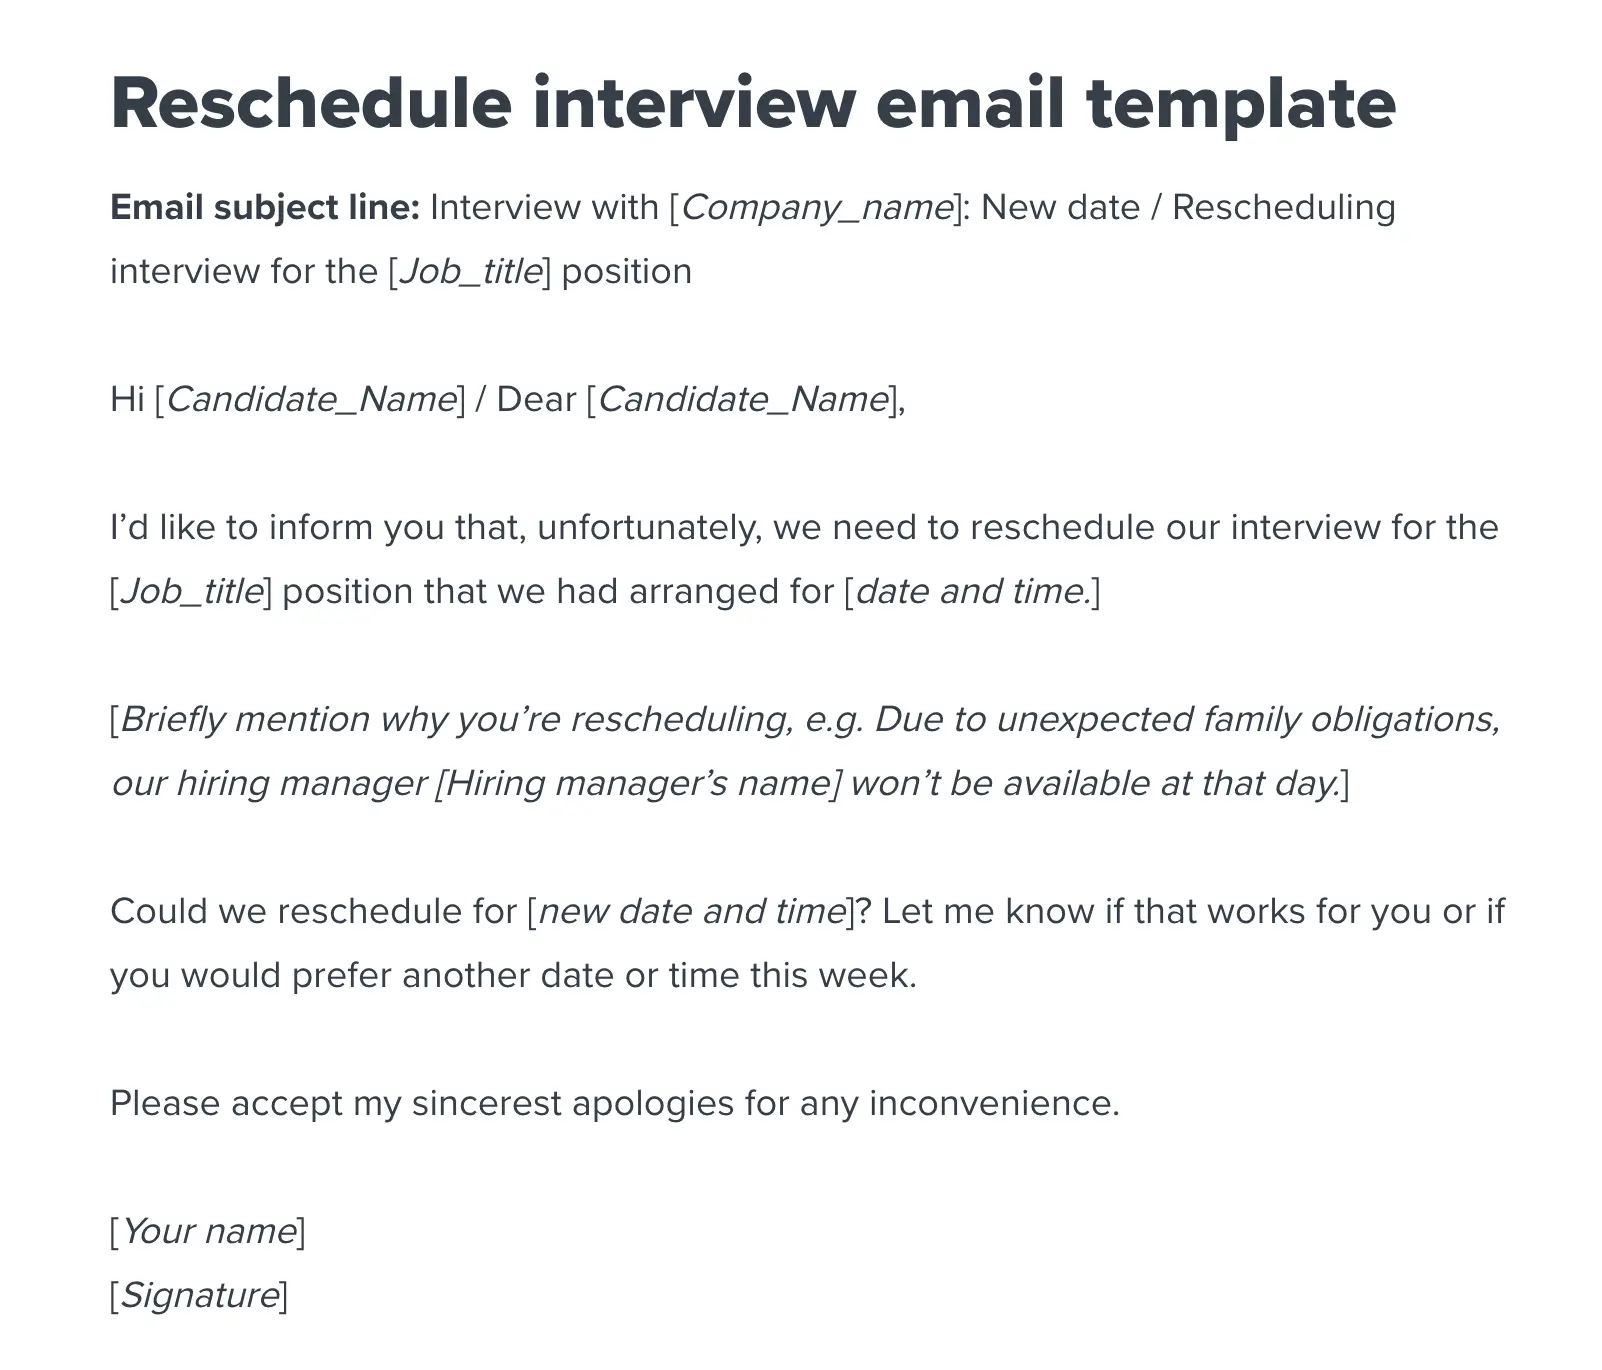 Reschedule interview email template (from employer)